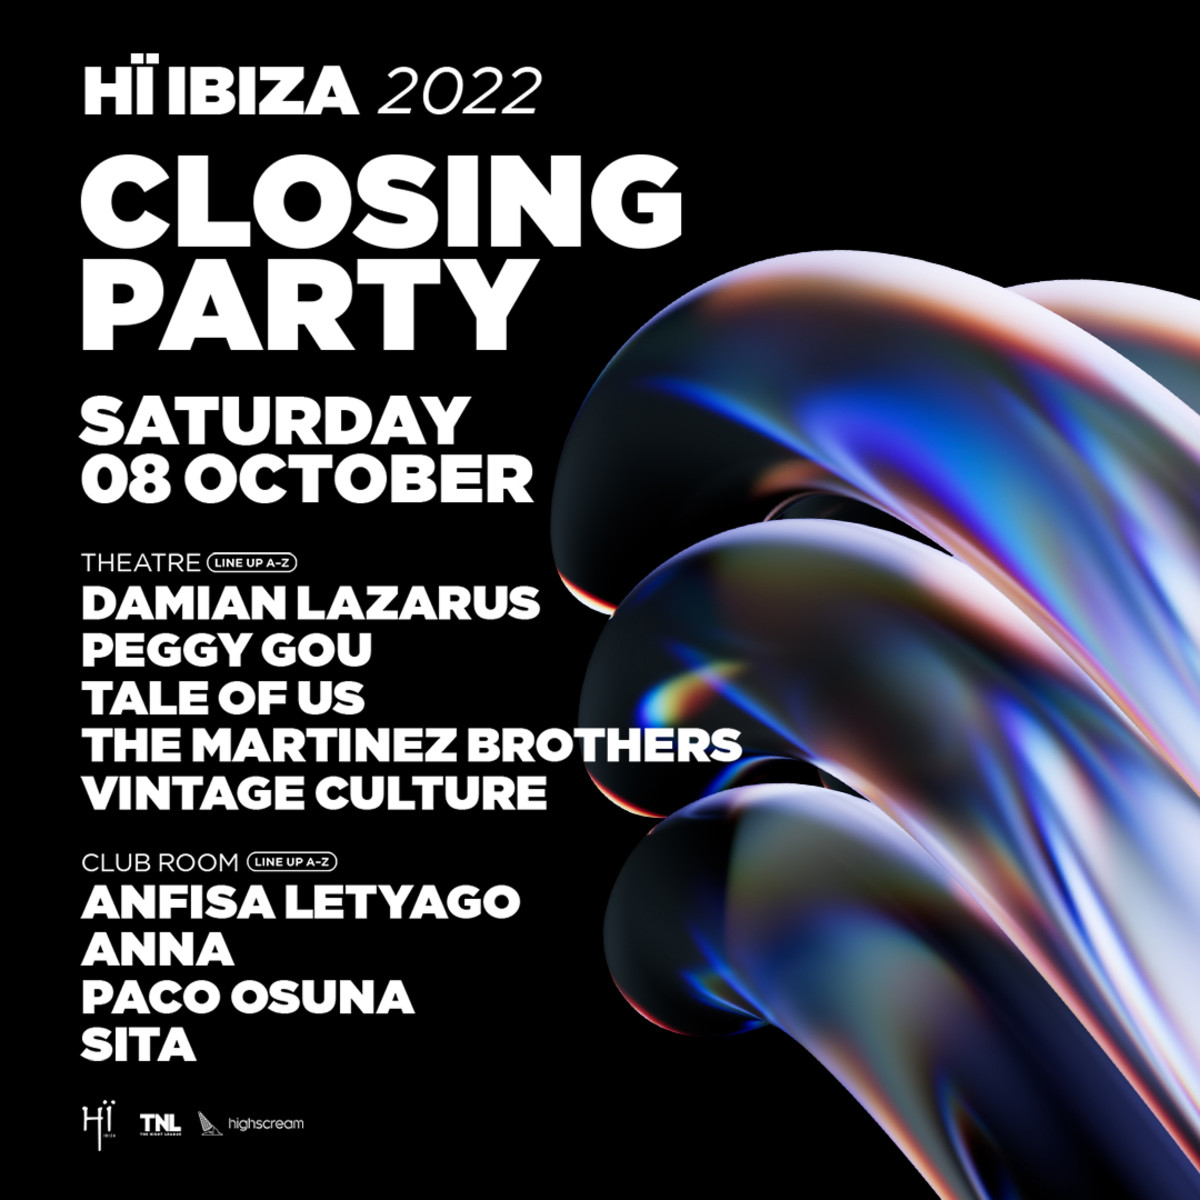 Lineup for Hï Ibiza's 2022 closing party.